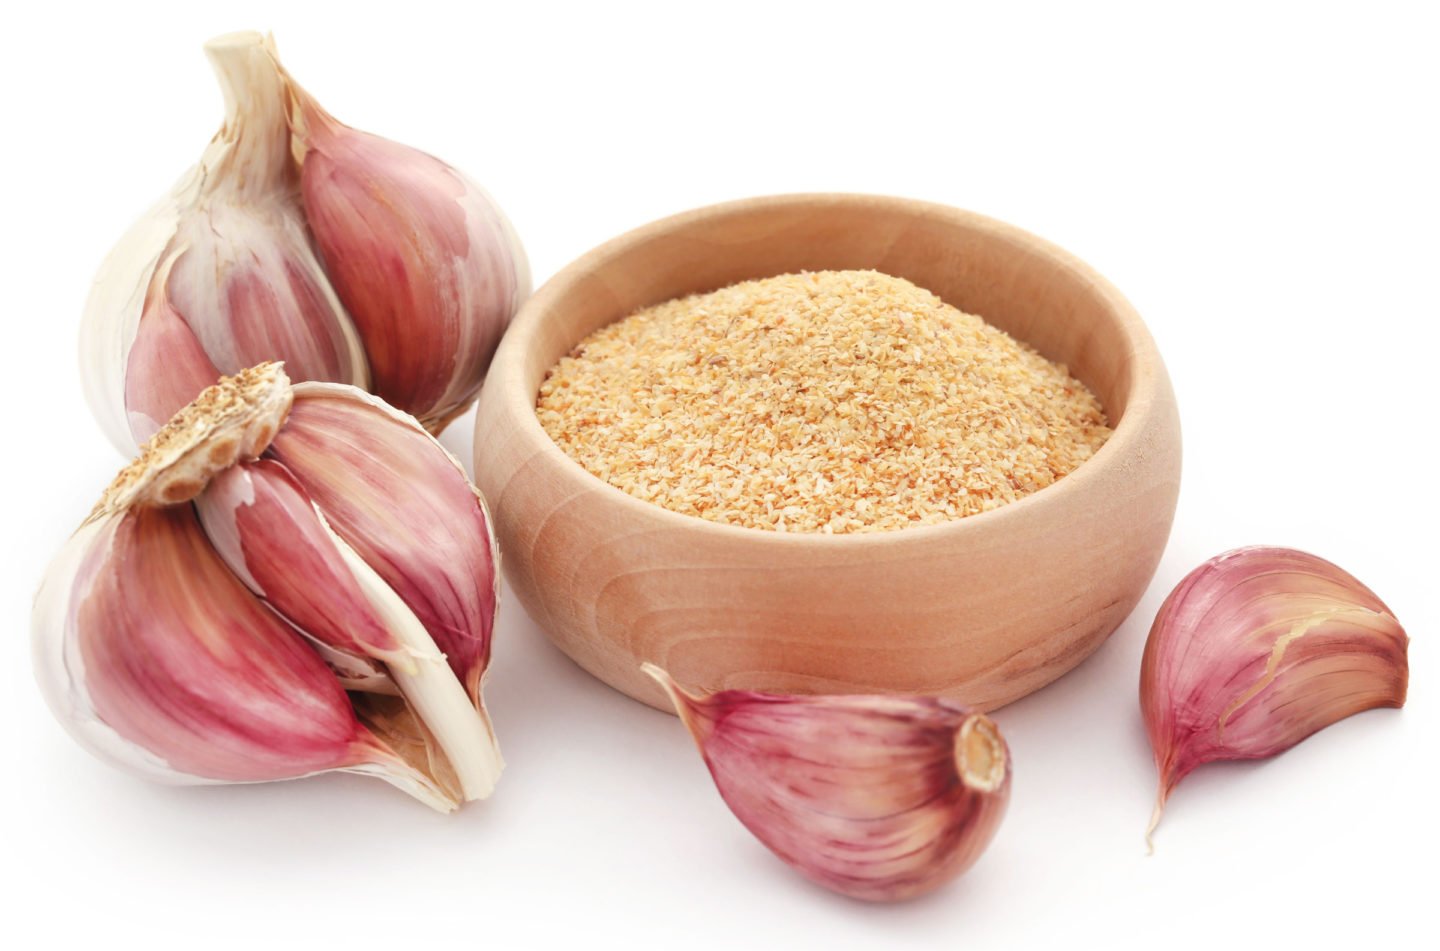 garlic powder in a bowl surrounded by garlic cloves